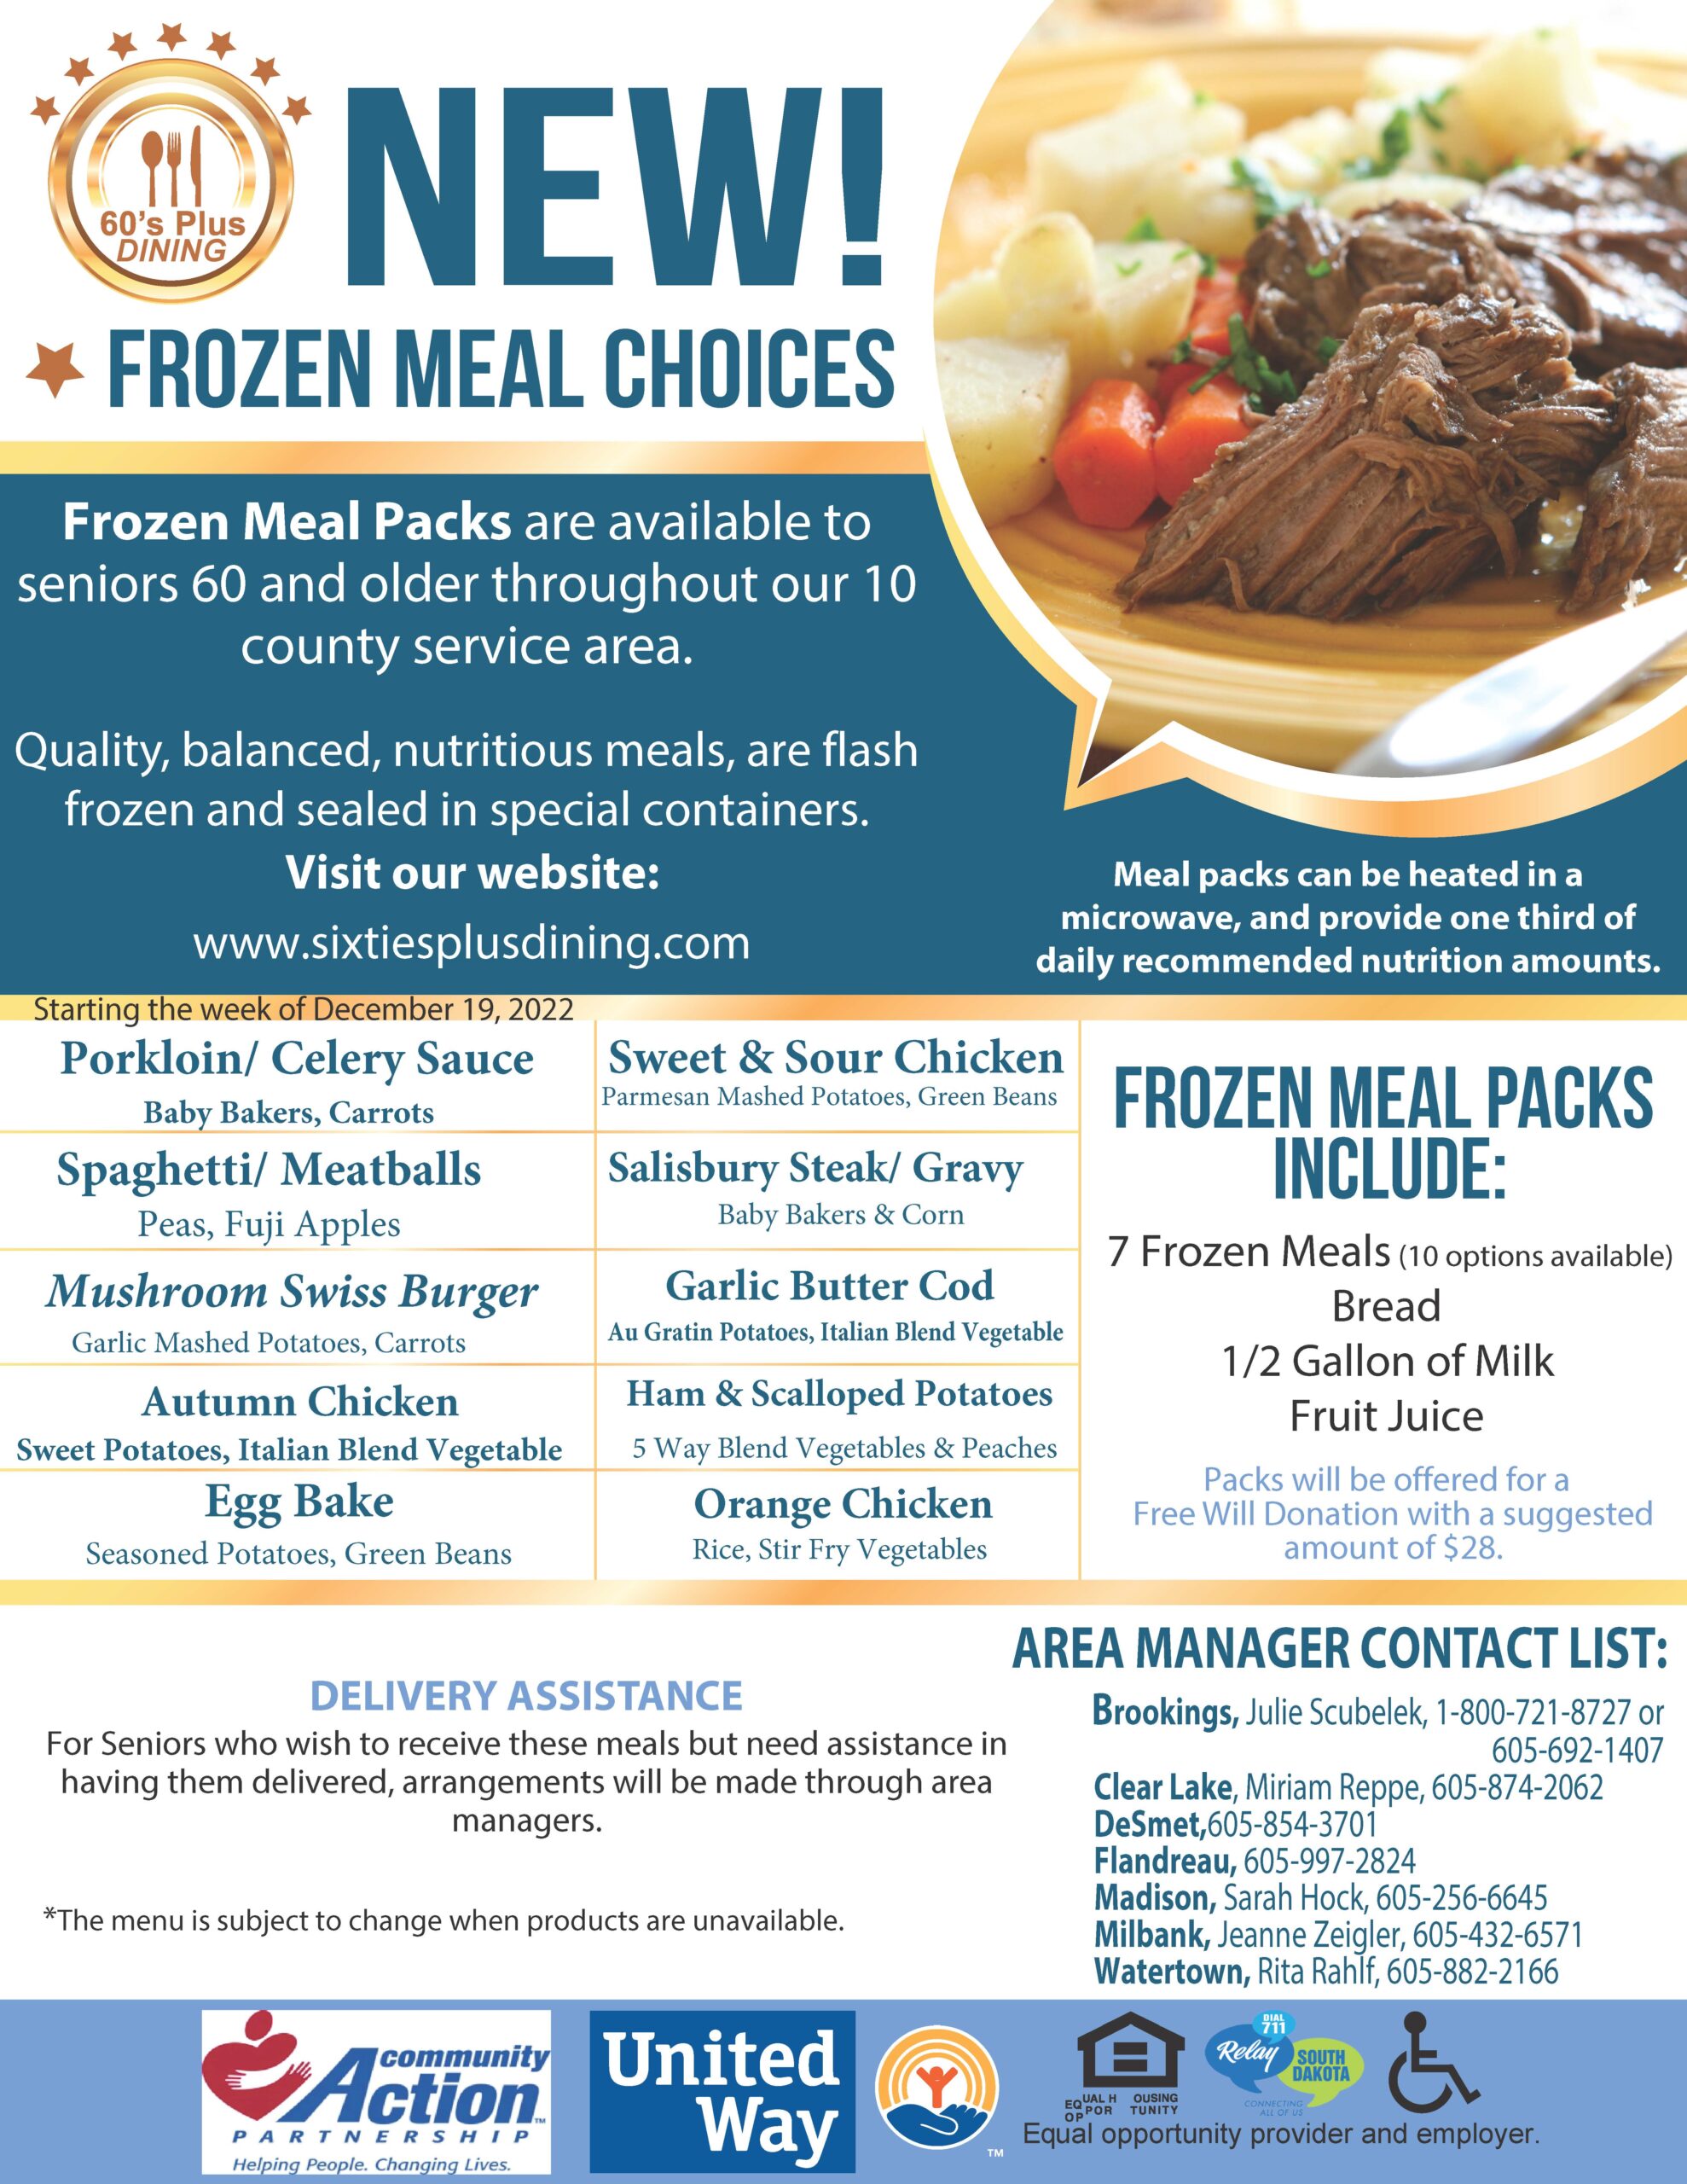 Madison Frozen Meal Choices -December 2022